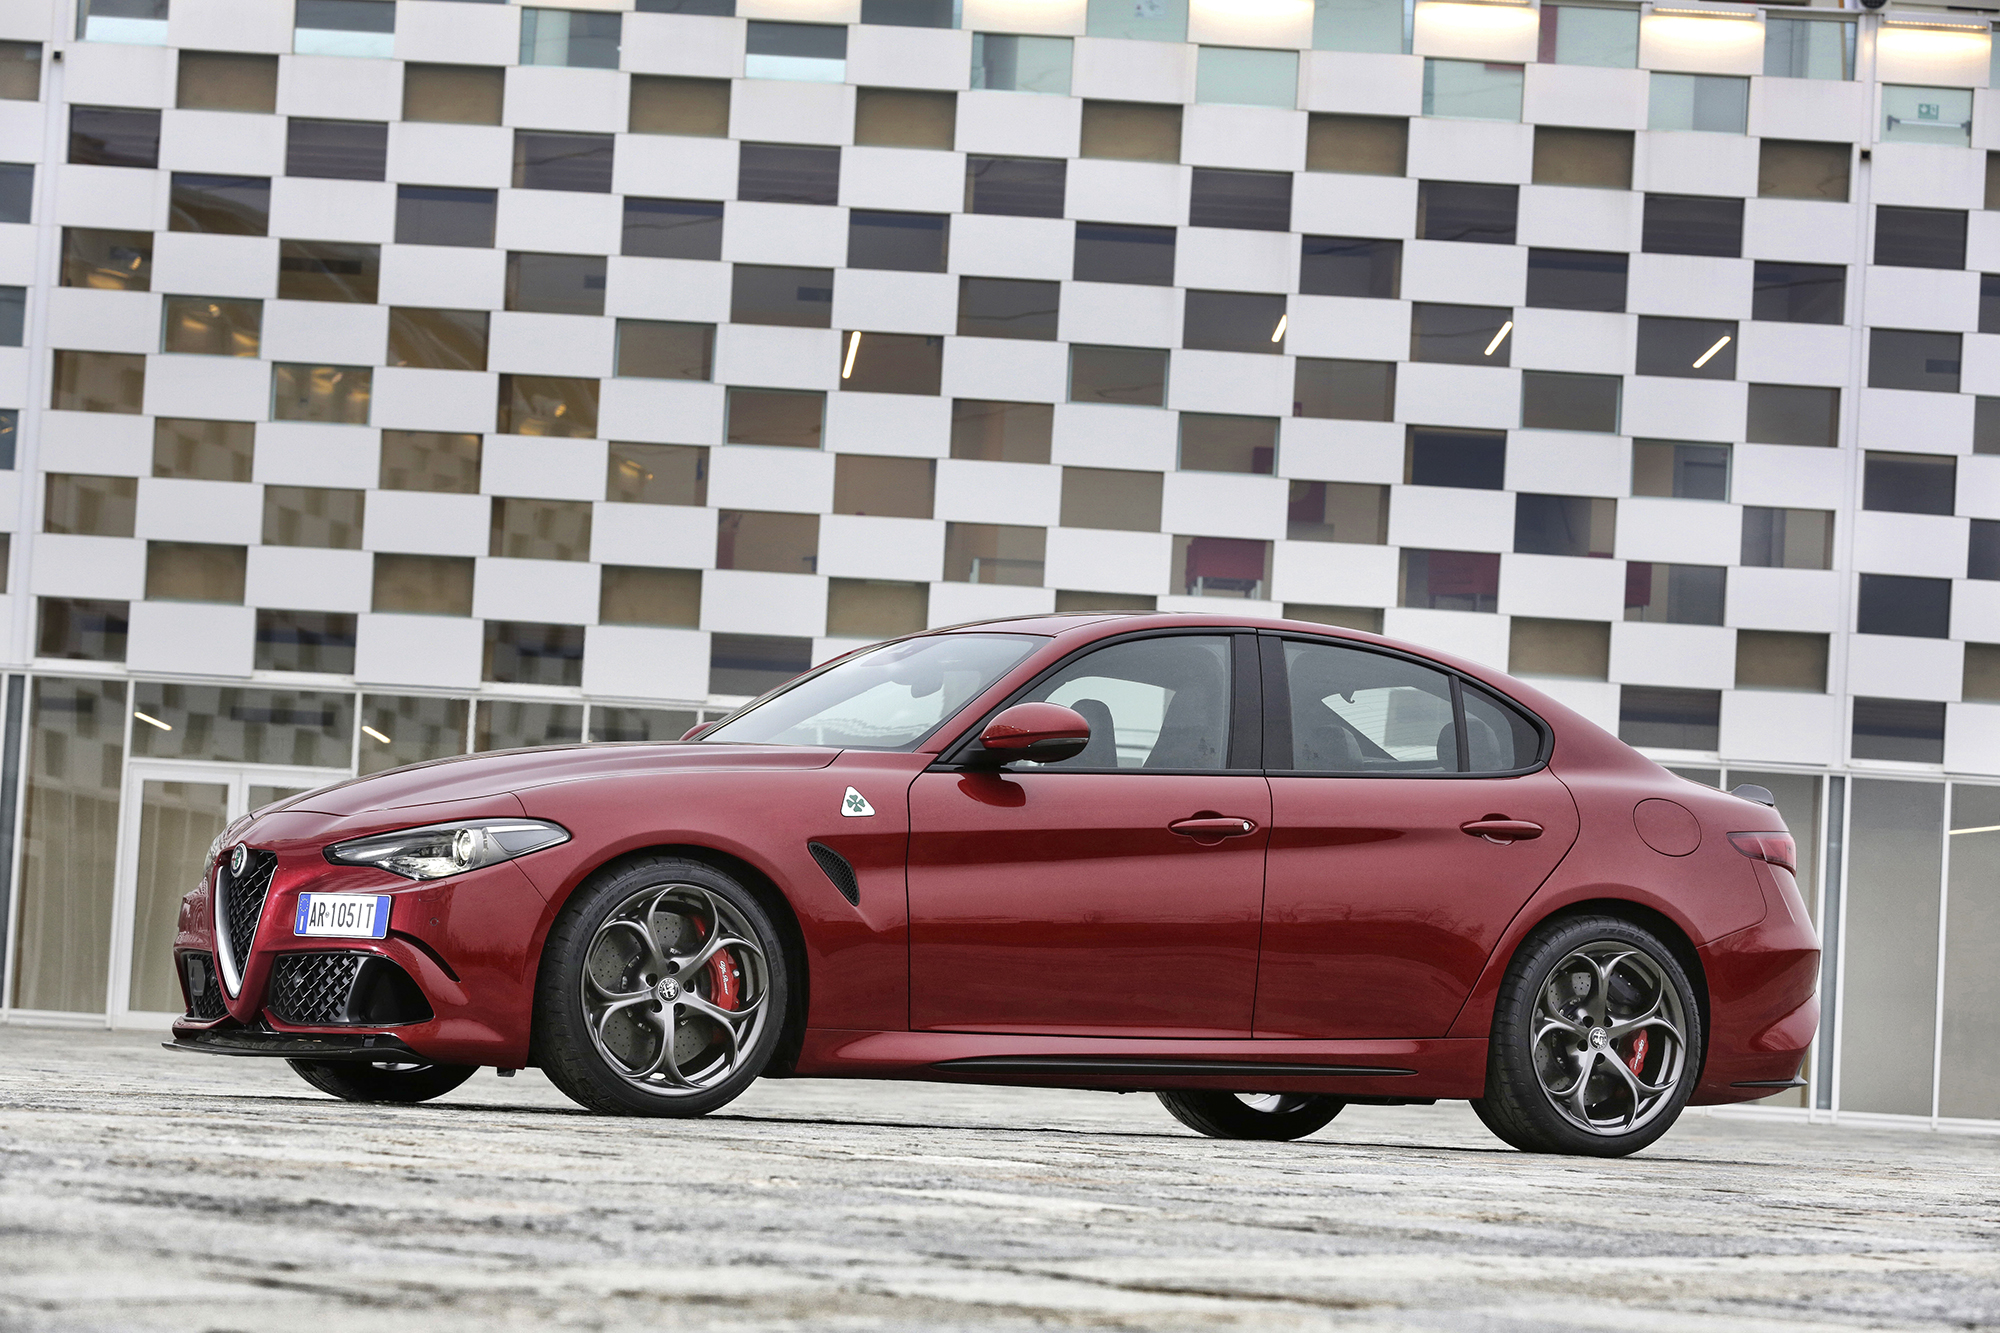 The 503bhp Giulia Quadrifoglio is exactly as powerful and exciting as its good looks – inside and out – suggest